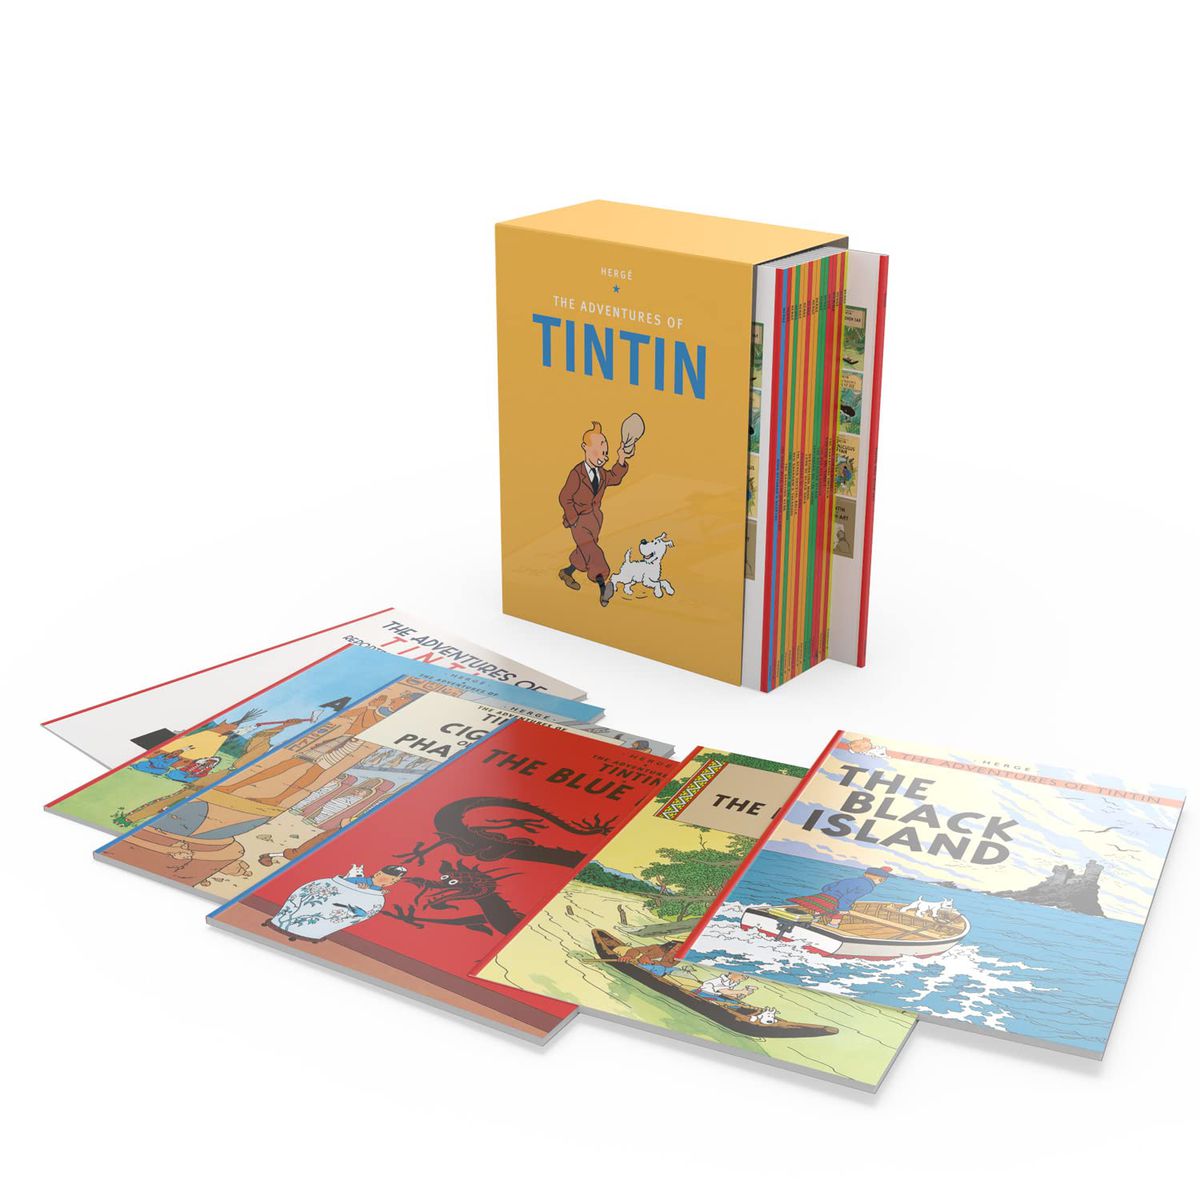 A Tintin box set with several books like The Black Island and The Blue Lotus sitting face up